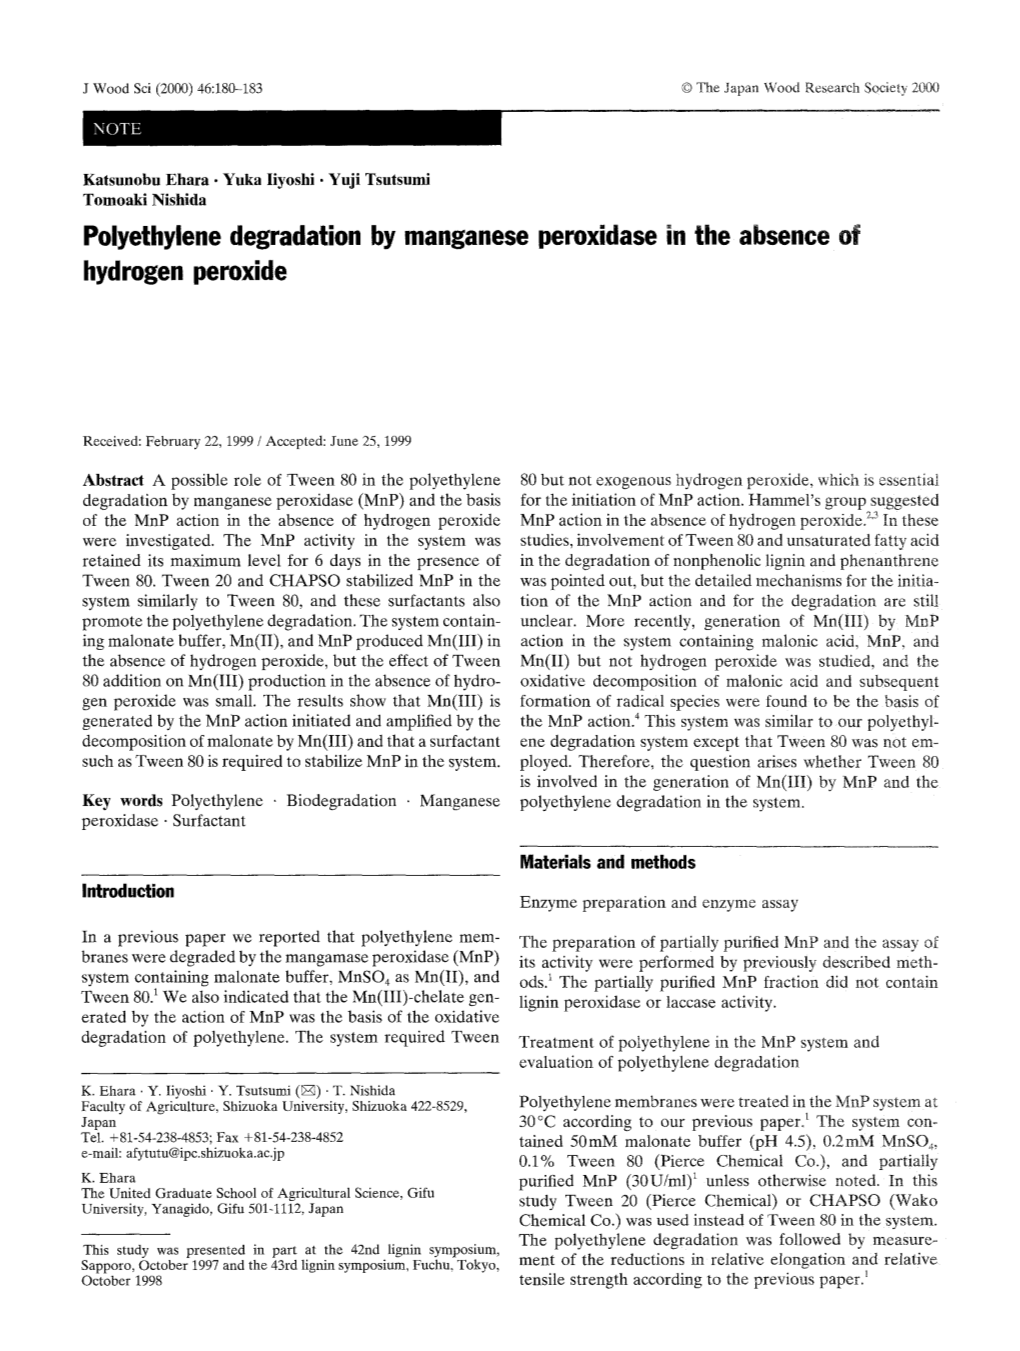 Polyethylene Degradation by Manganese Peroxidase in the Absence of Hydrogen Peroxide